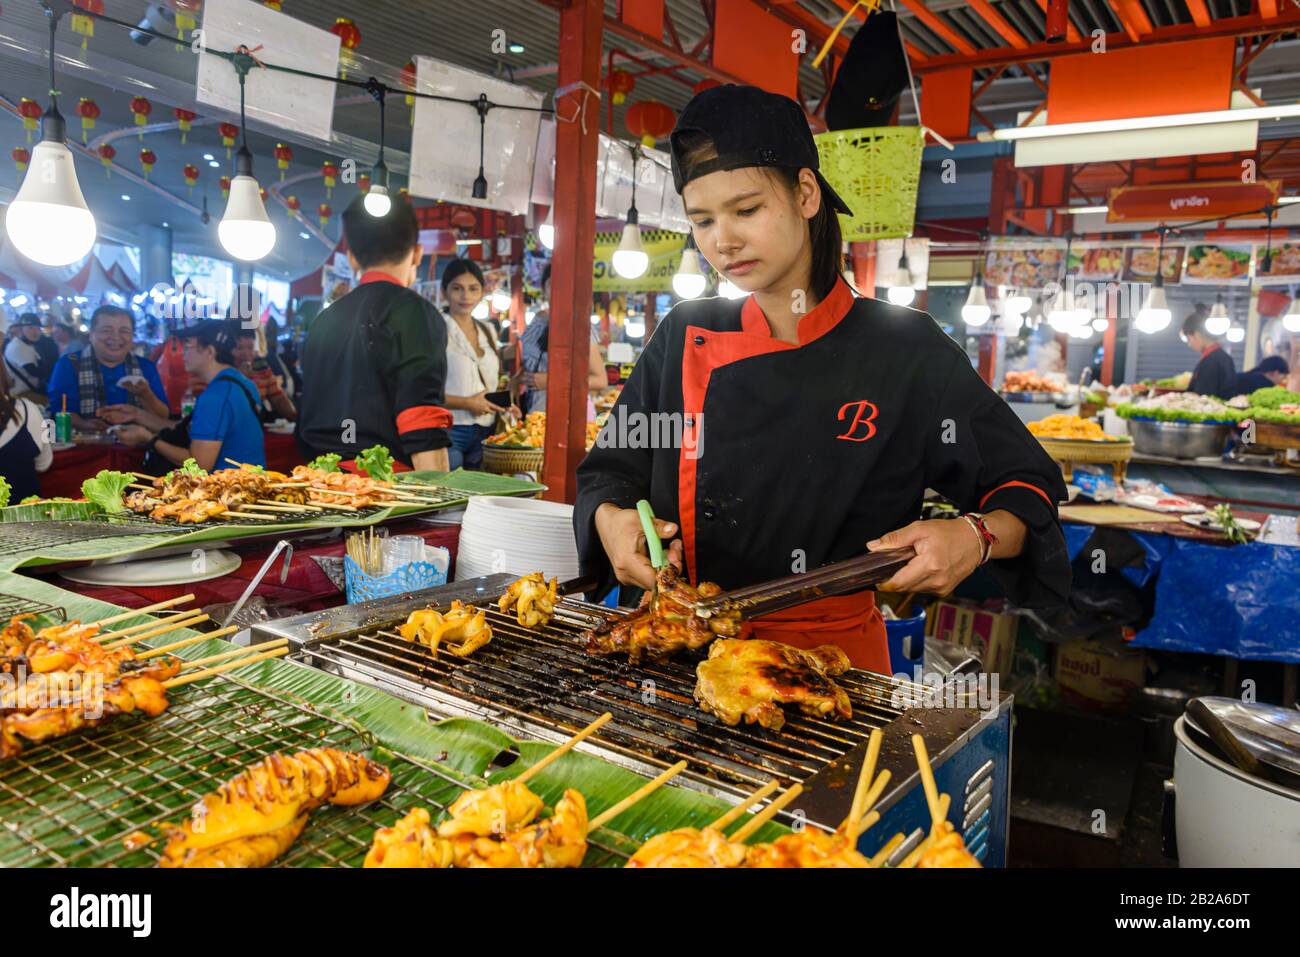 A young woman uses scissors to cut up grilled chicken at a street food stall, Bangkok, Thailand Stock Photo